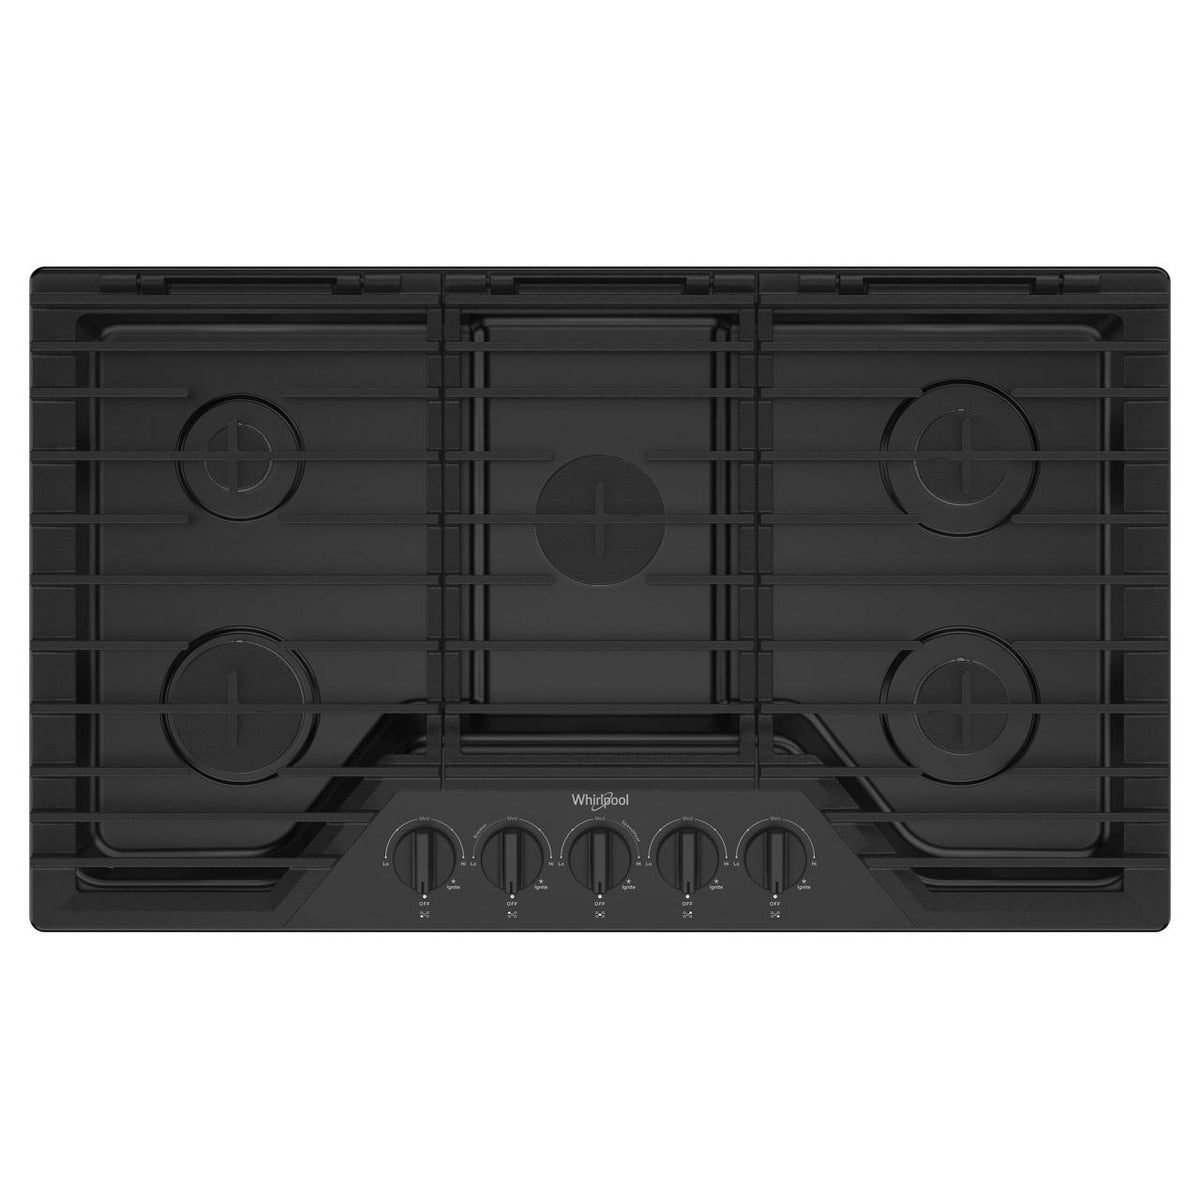 36-inch Built-in Gas Cooktop with EZ-2-Lift™ Hinged Cast-Iron Grates WCGK5036PB IMAGE 1